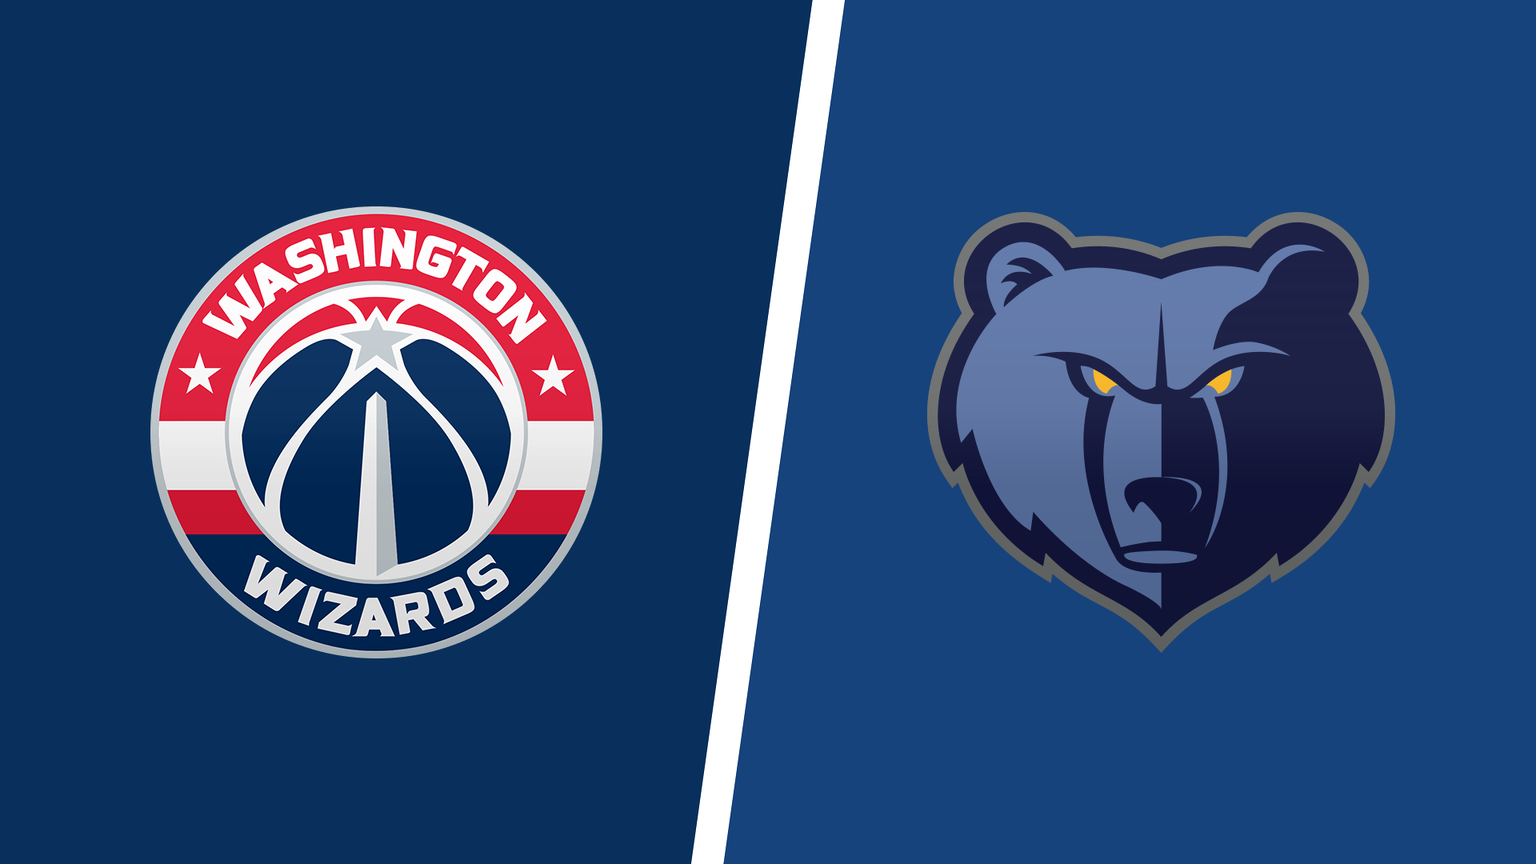 How to Watch Washington Wizards vs. Memphis Grizzlies Game Online on